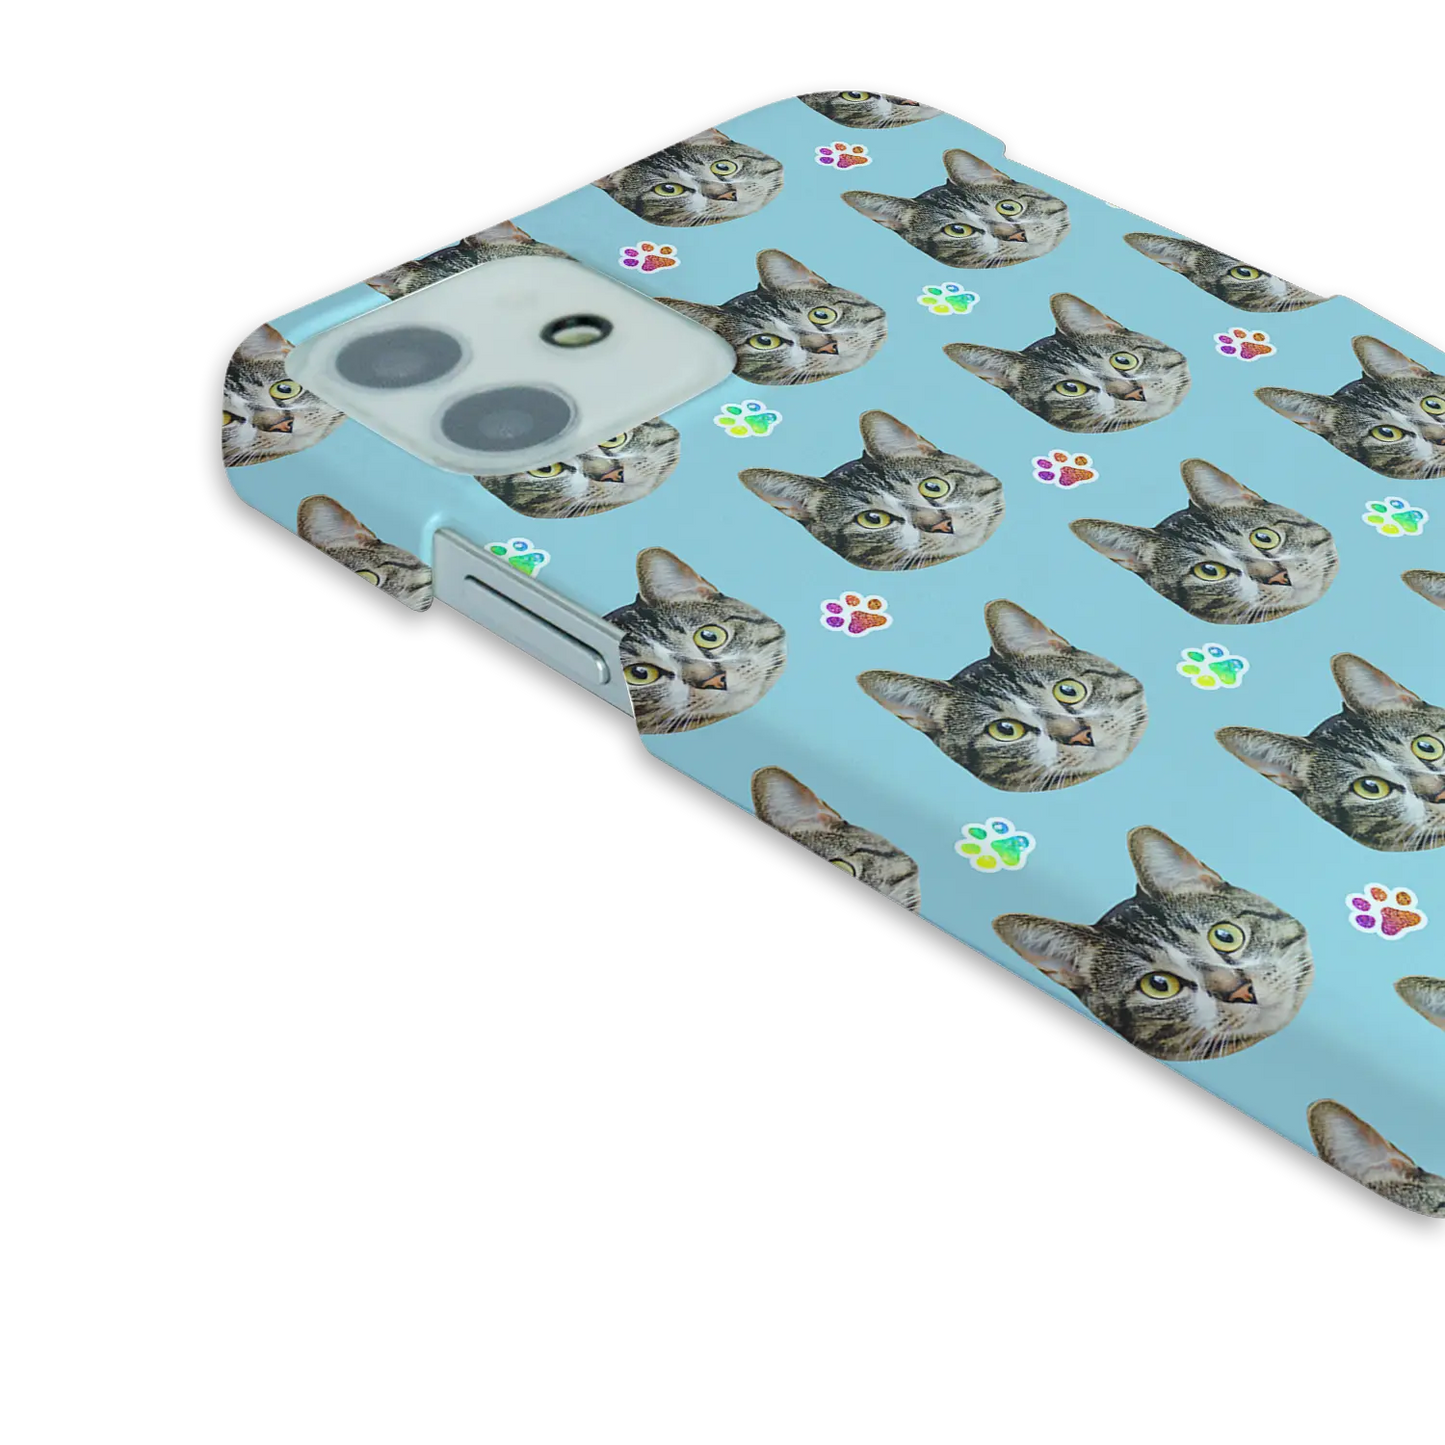 Face & Paws - Personalised Galaxy S Case